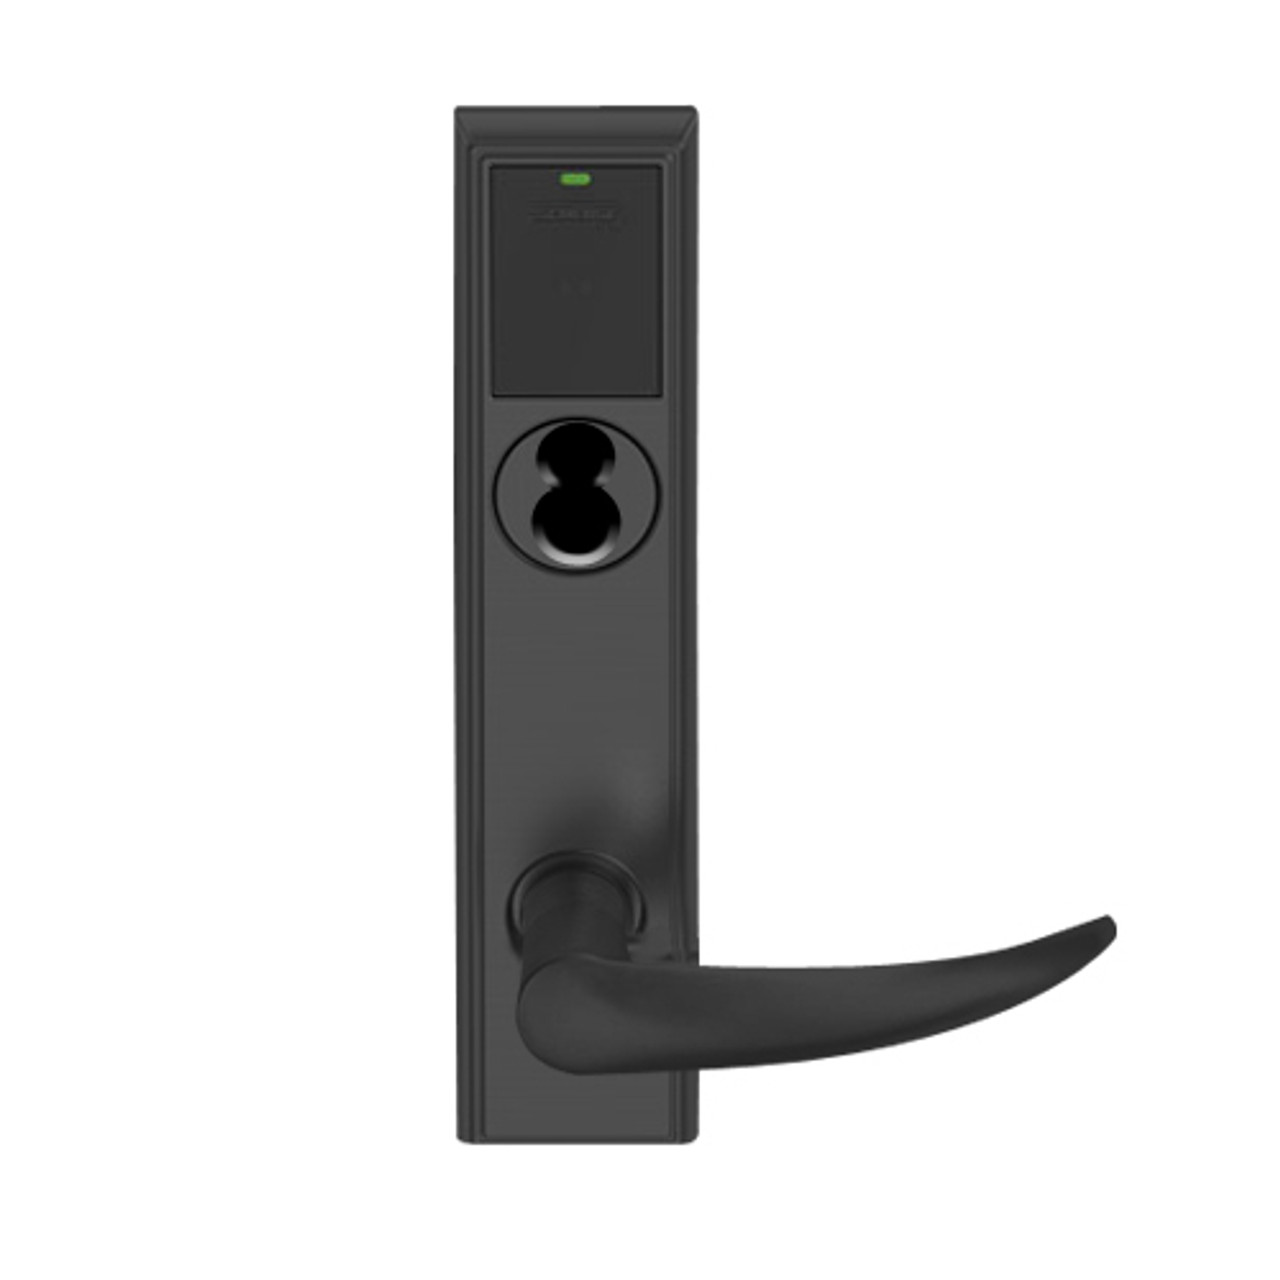 LEMB-ADD-BD-OME-622 Schlage Privacy/Office Wireless Addison Mortise Lock with Push Button, LED and Omega Lever Prepped for SFIC in Matte Black